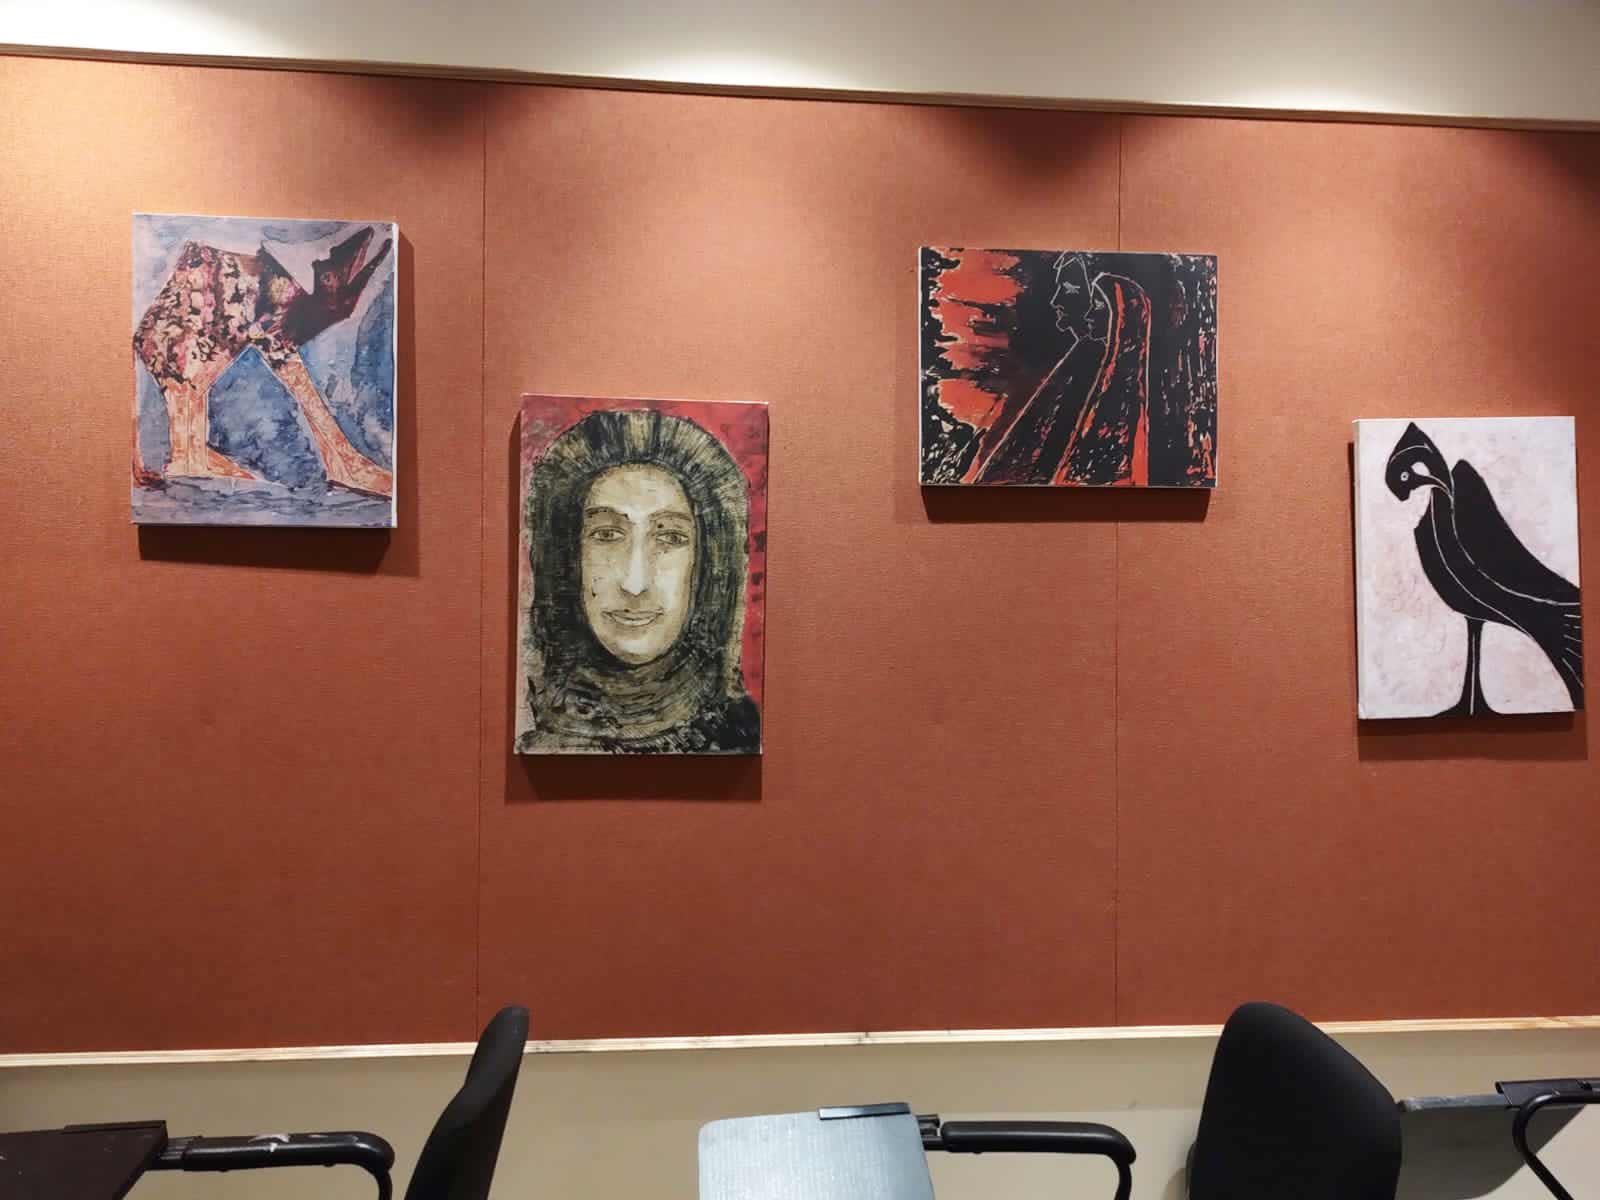 Rabindra Kaksha has on display 28 replicas of Tagore’s paintings. “As an educationist and author, I feel art plays a significant role in understanding literature for students. Therefore, Tagore’s paintings, besides his literary works, are also important for the students of literature. To study Tagore’s ideas, his paintings must be studied as well,” said principal Ajanta Paul 